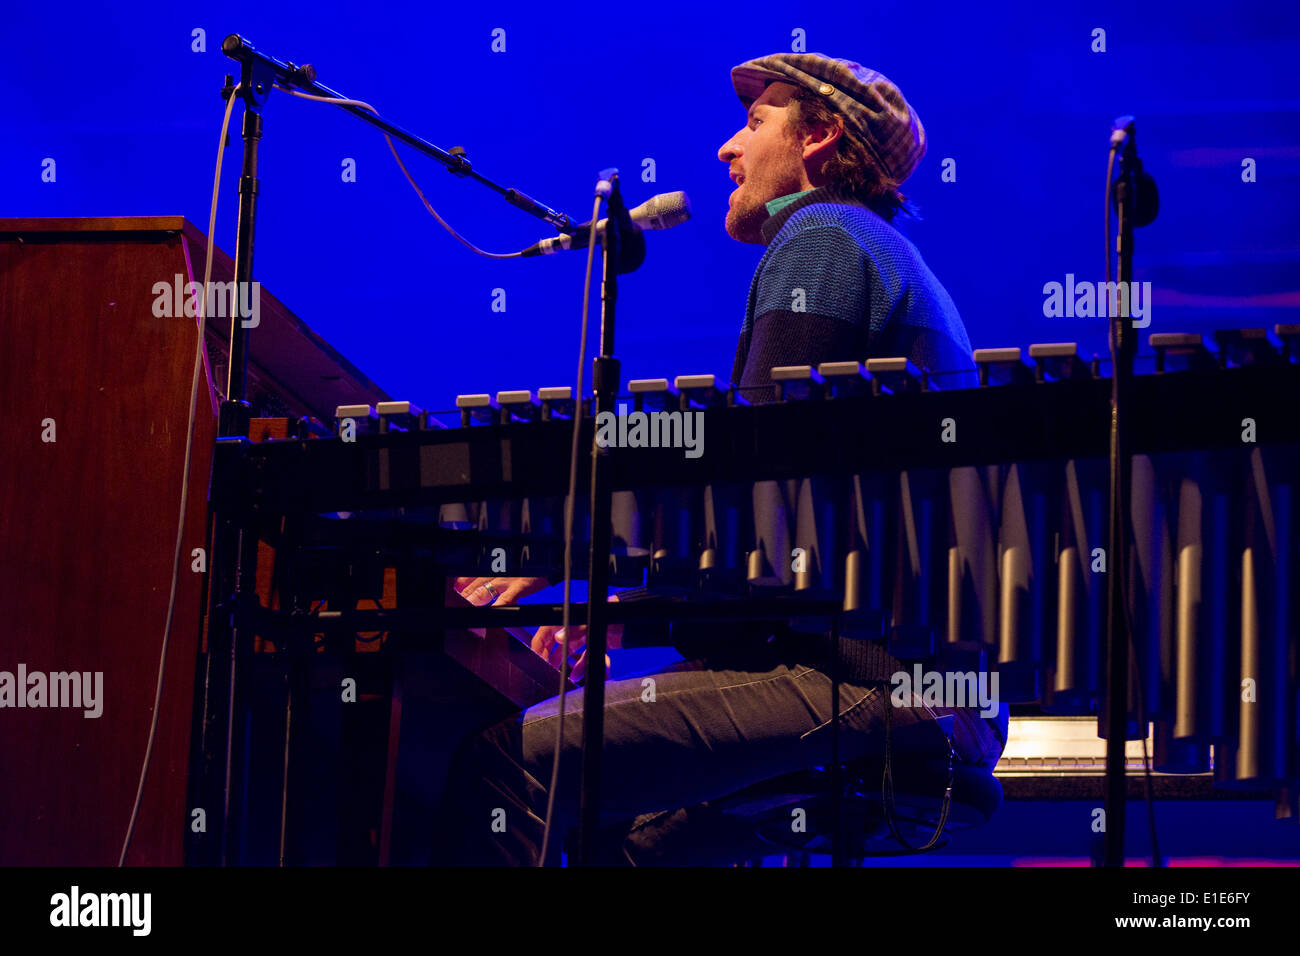 Chicago, Illinois, USA. 31st May, 2014. Musician ZACH GILL performs live with Jack Johnson at the FirstMerit Bank Pavilion at Northerly Island in Chicago, Illinois © Daniel DeSlover/ZUMAPRESS.com/Alamy Live News Stock Photo